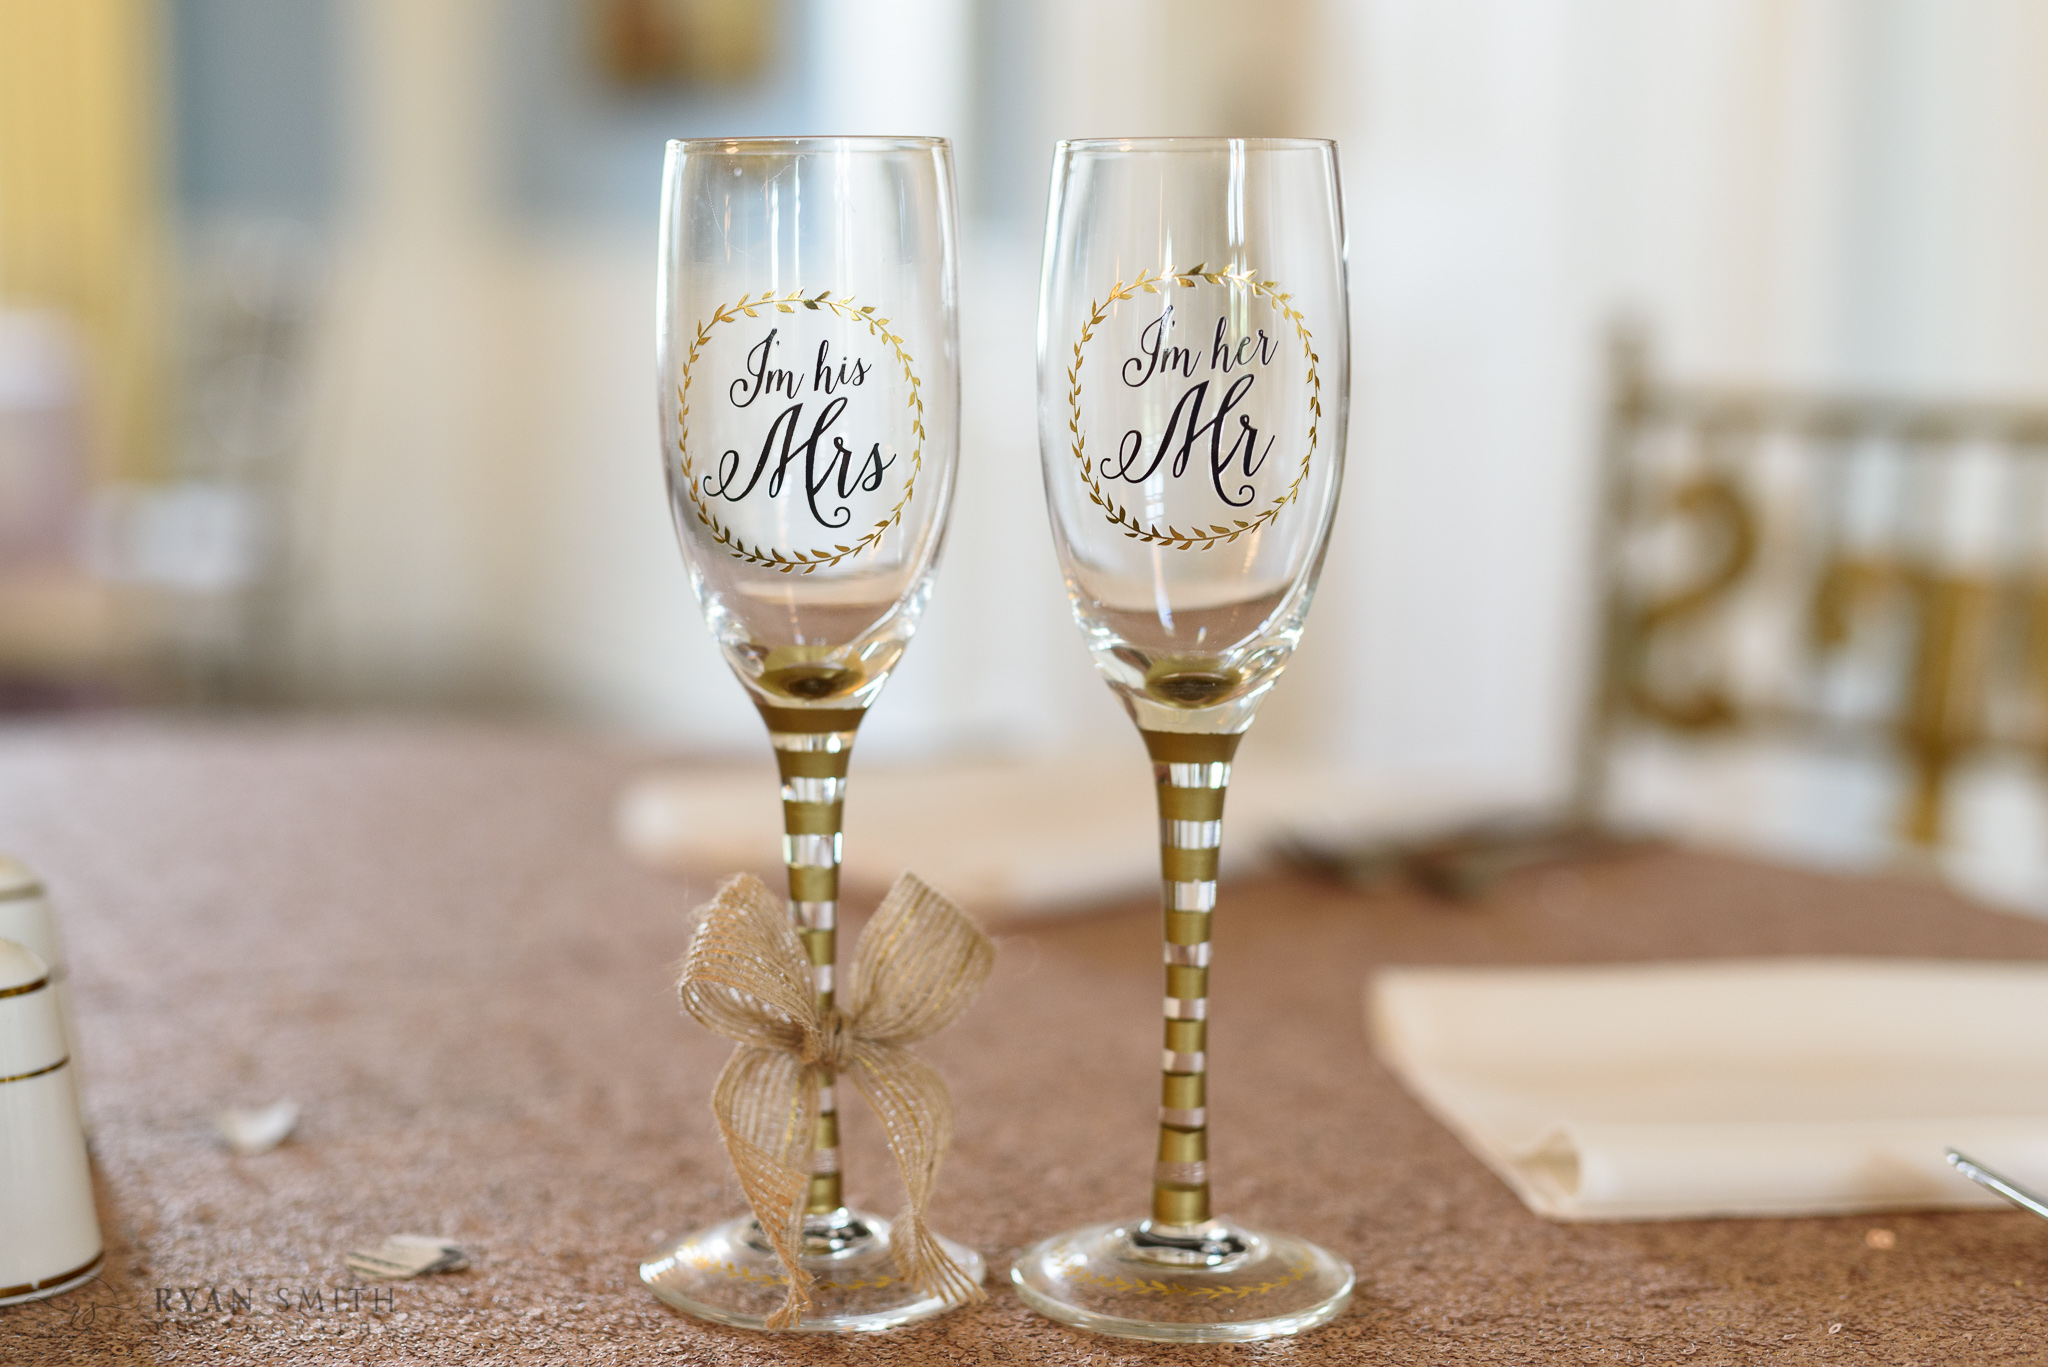 His and her wine glasses - Pine Lakes Country Club